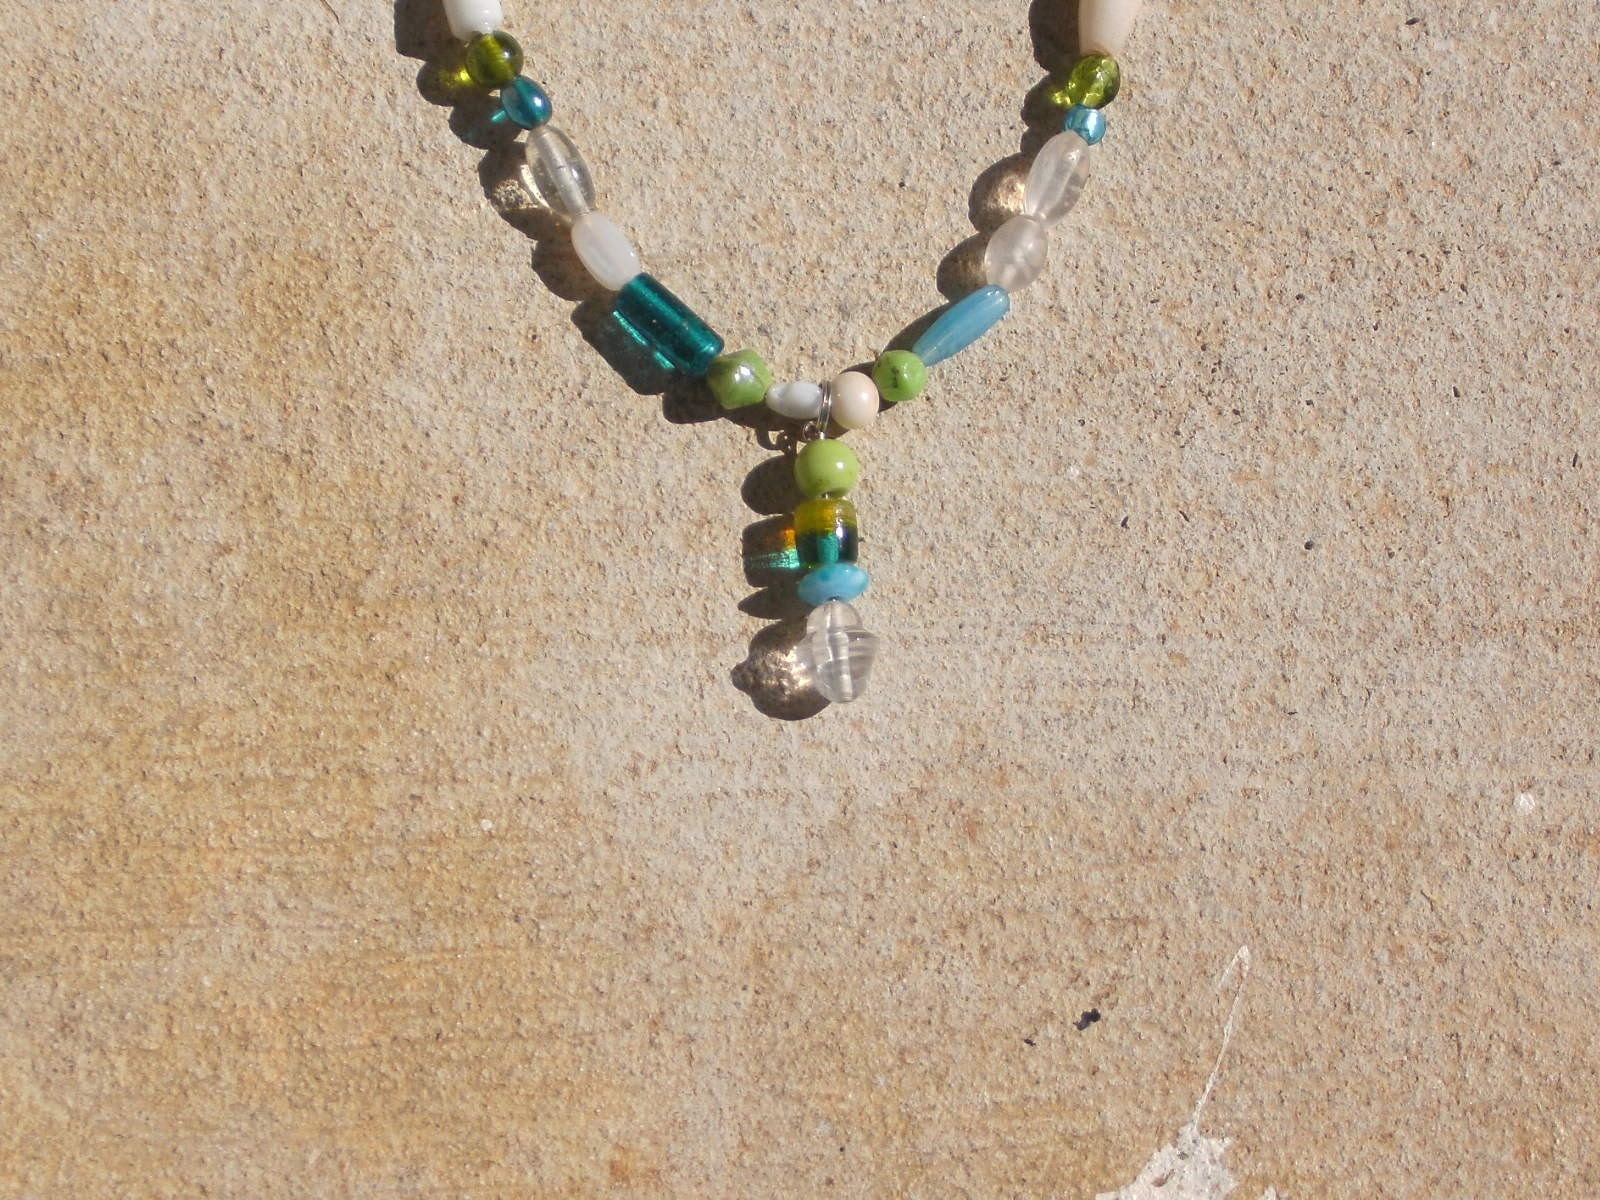 Margarita in greens and blues necklace